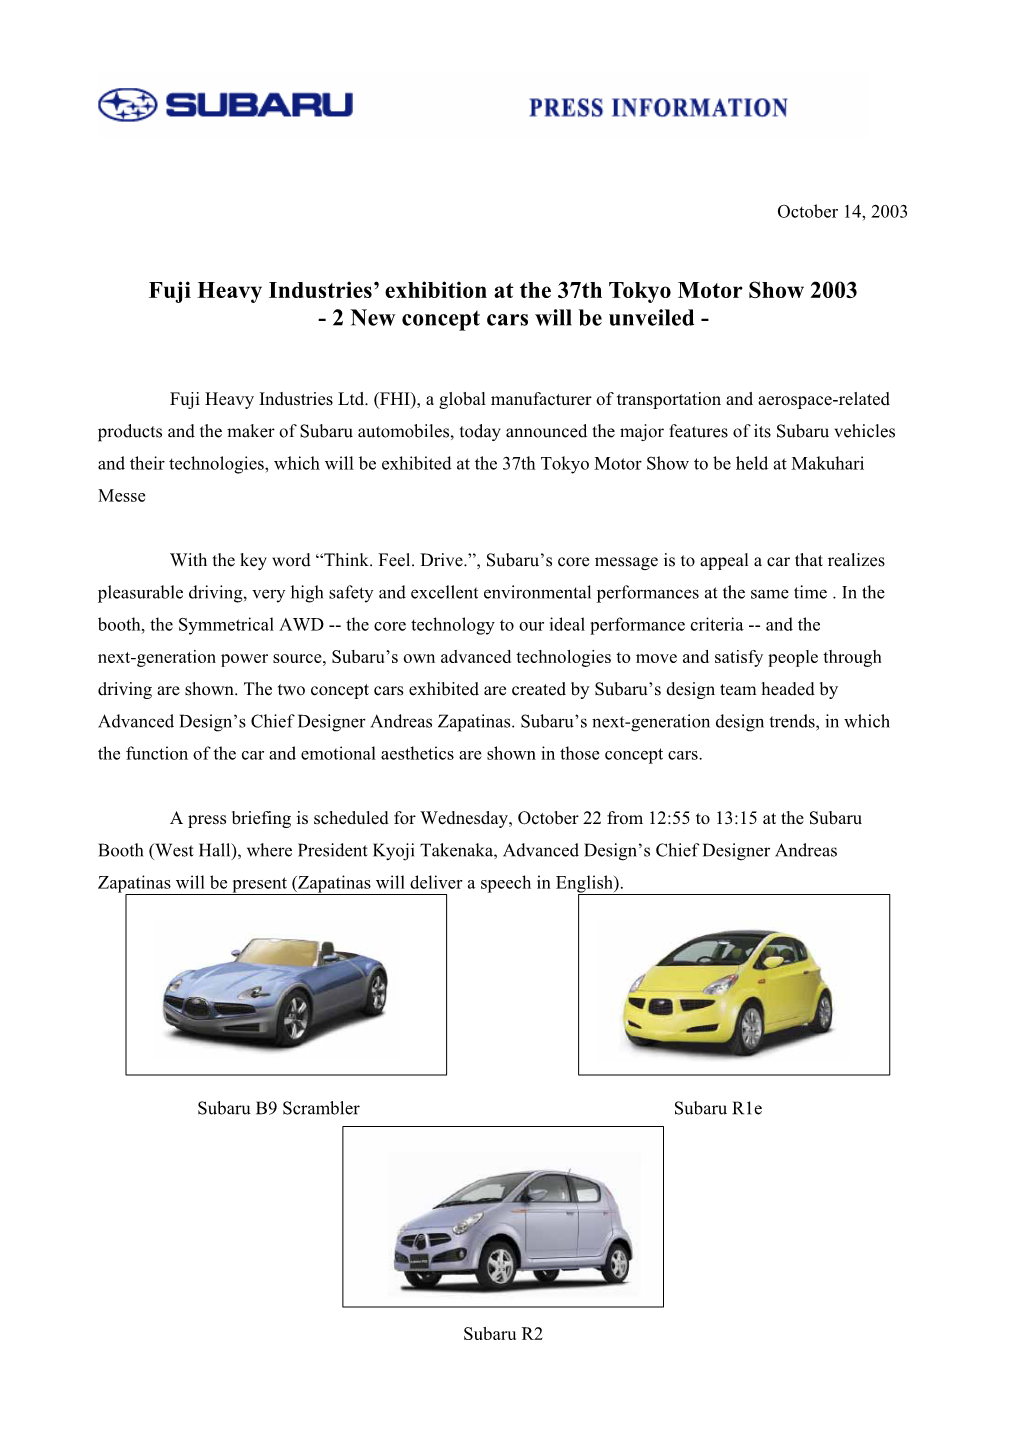 Fuji Heavy Industries' Exhibition at the 37Th Tokyo Motor Show 2003(PDF